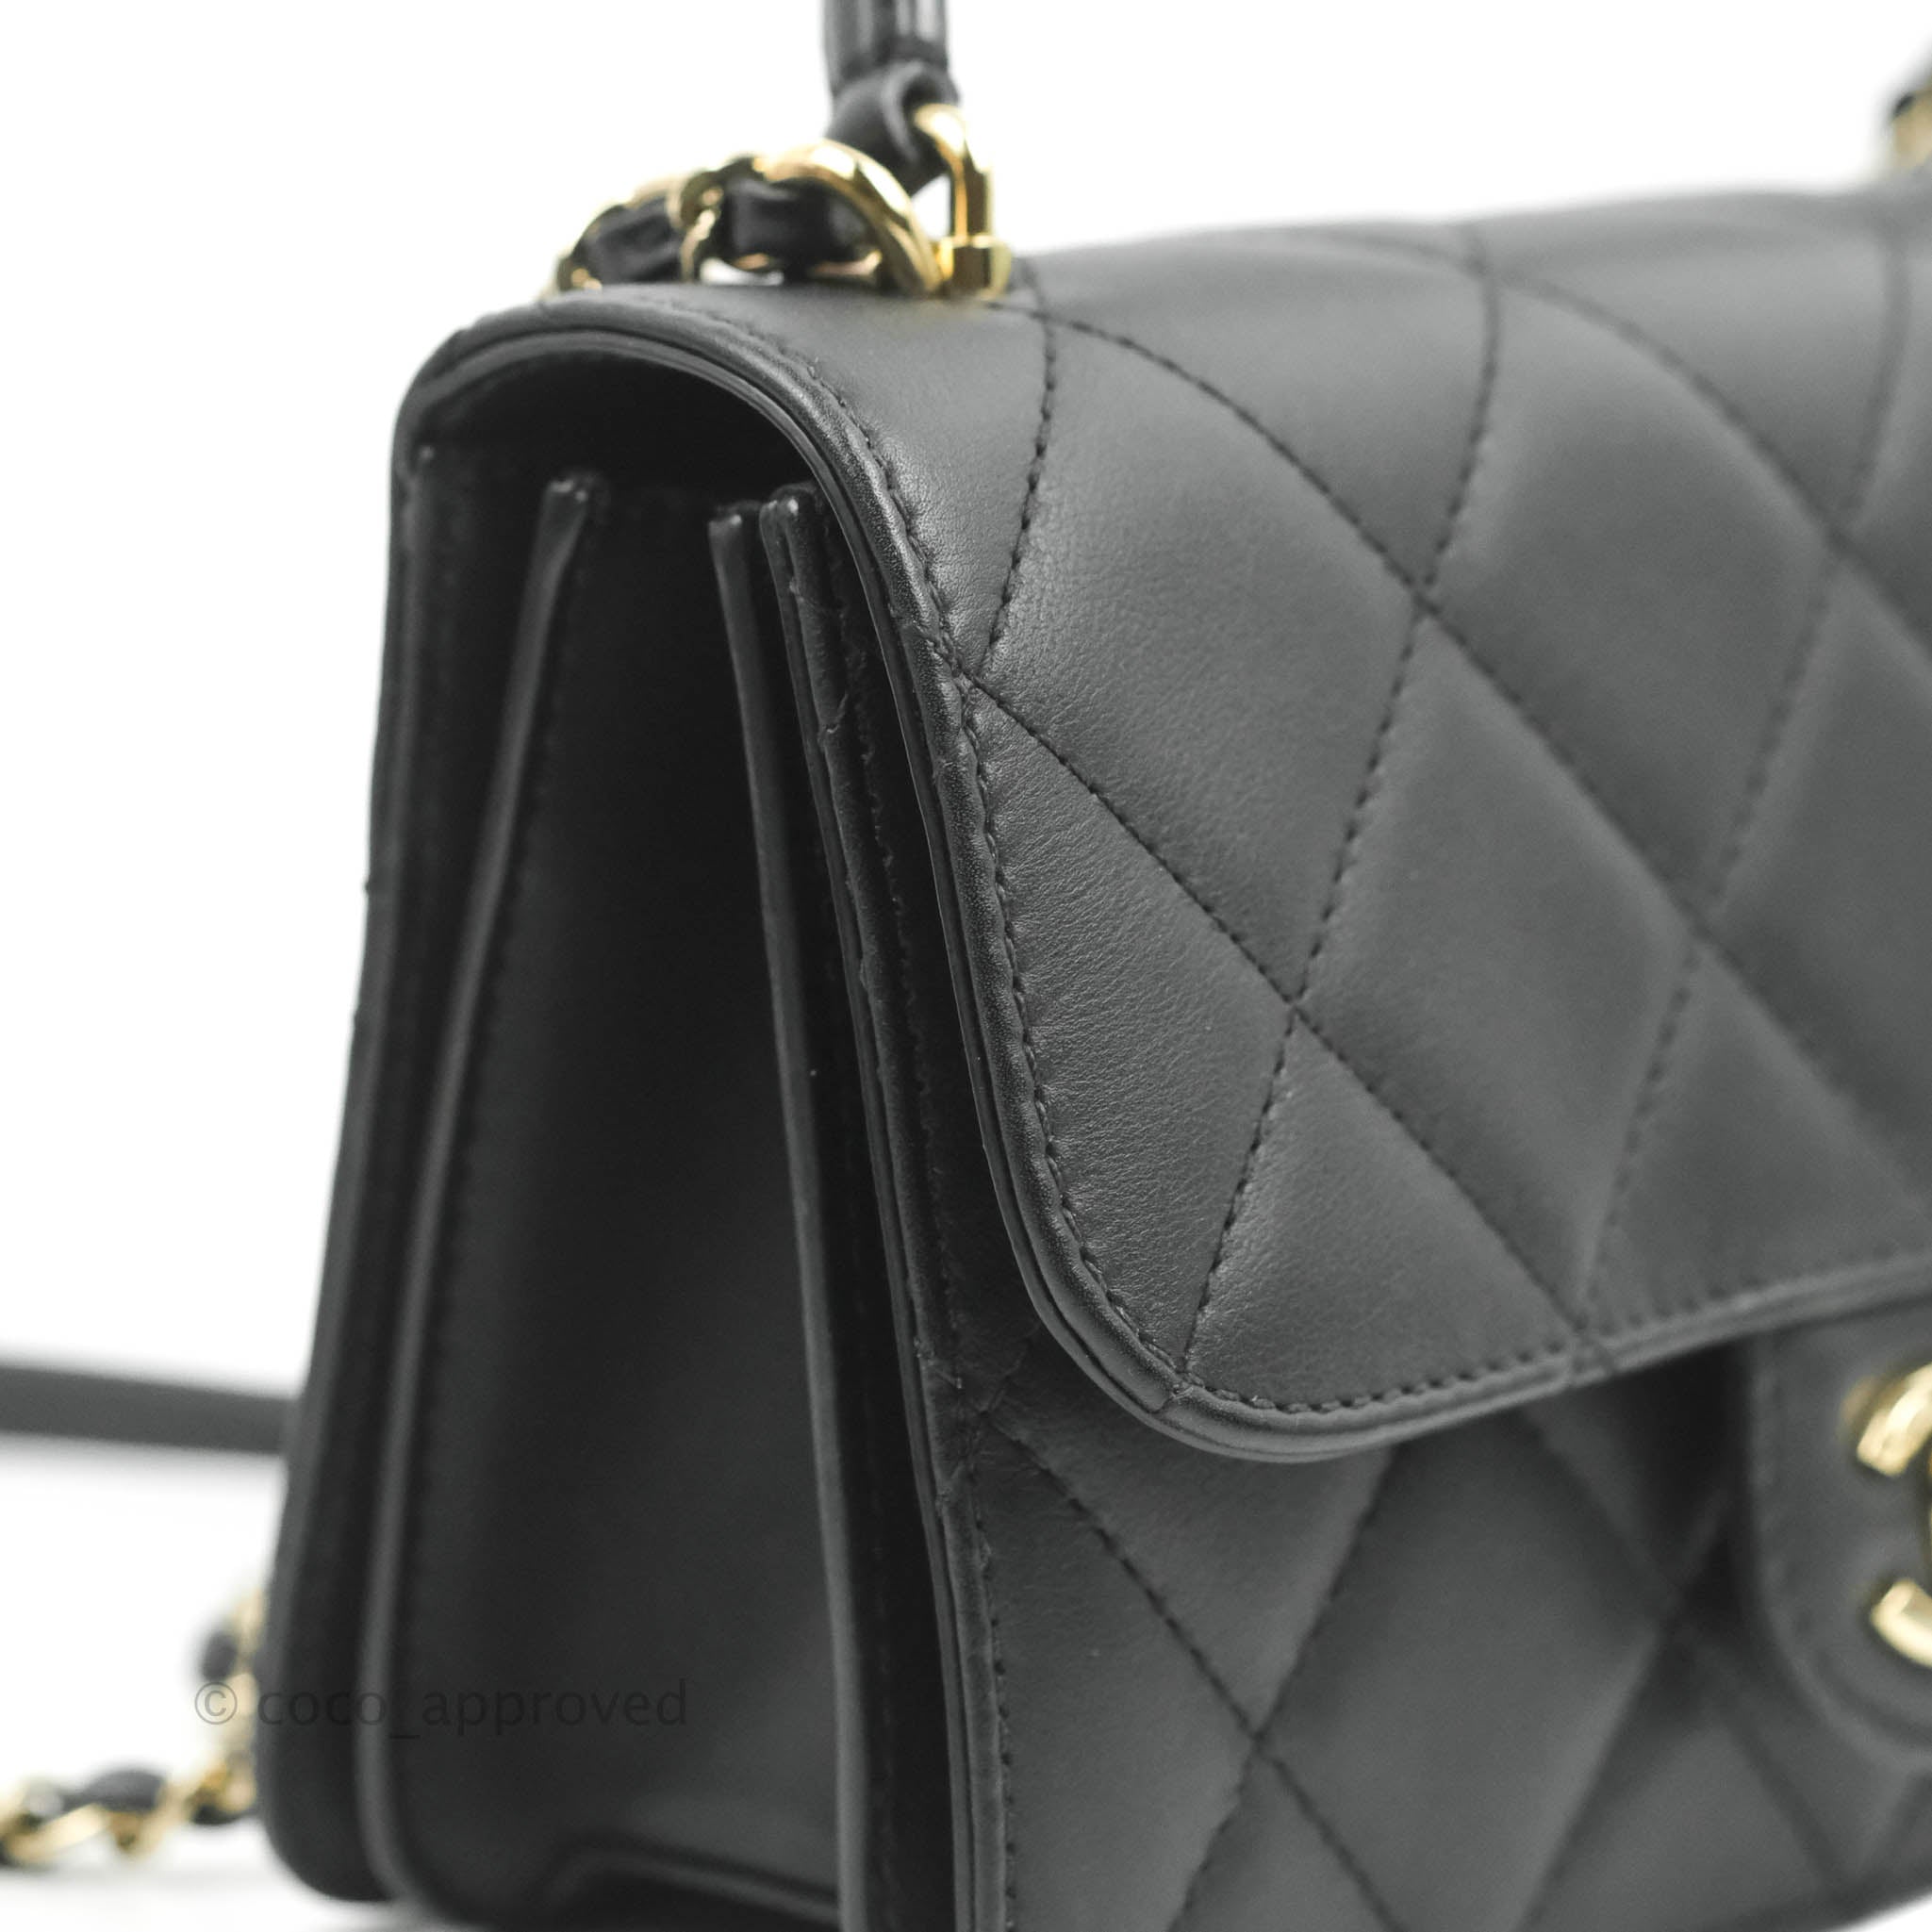 Chanel Small Round Messenger Bag Black Calfskin Aged Gold Hardware – Coco  Approved Studio